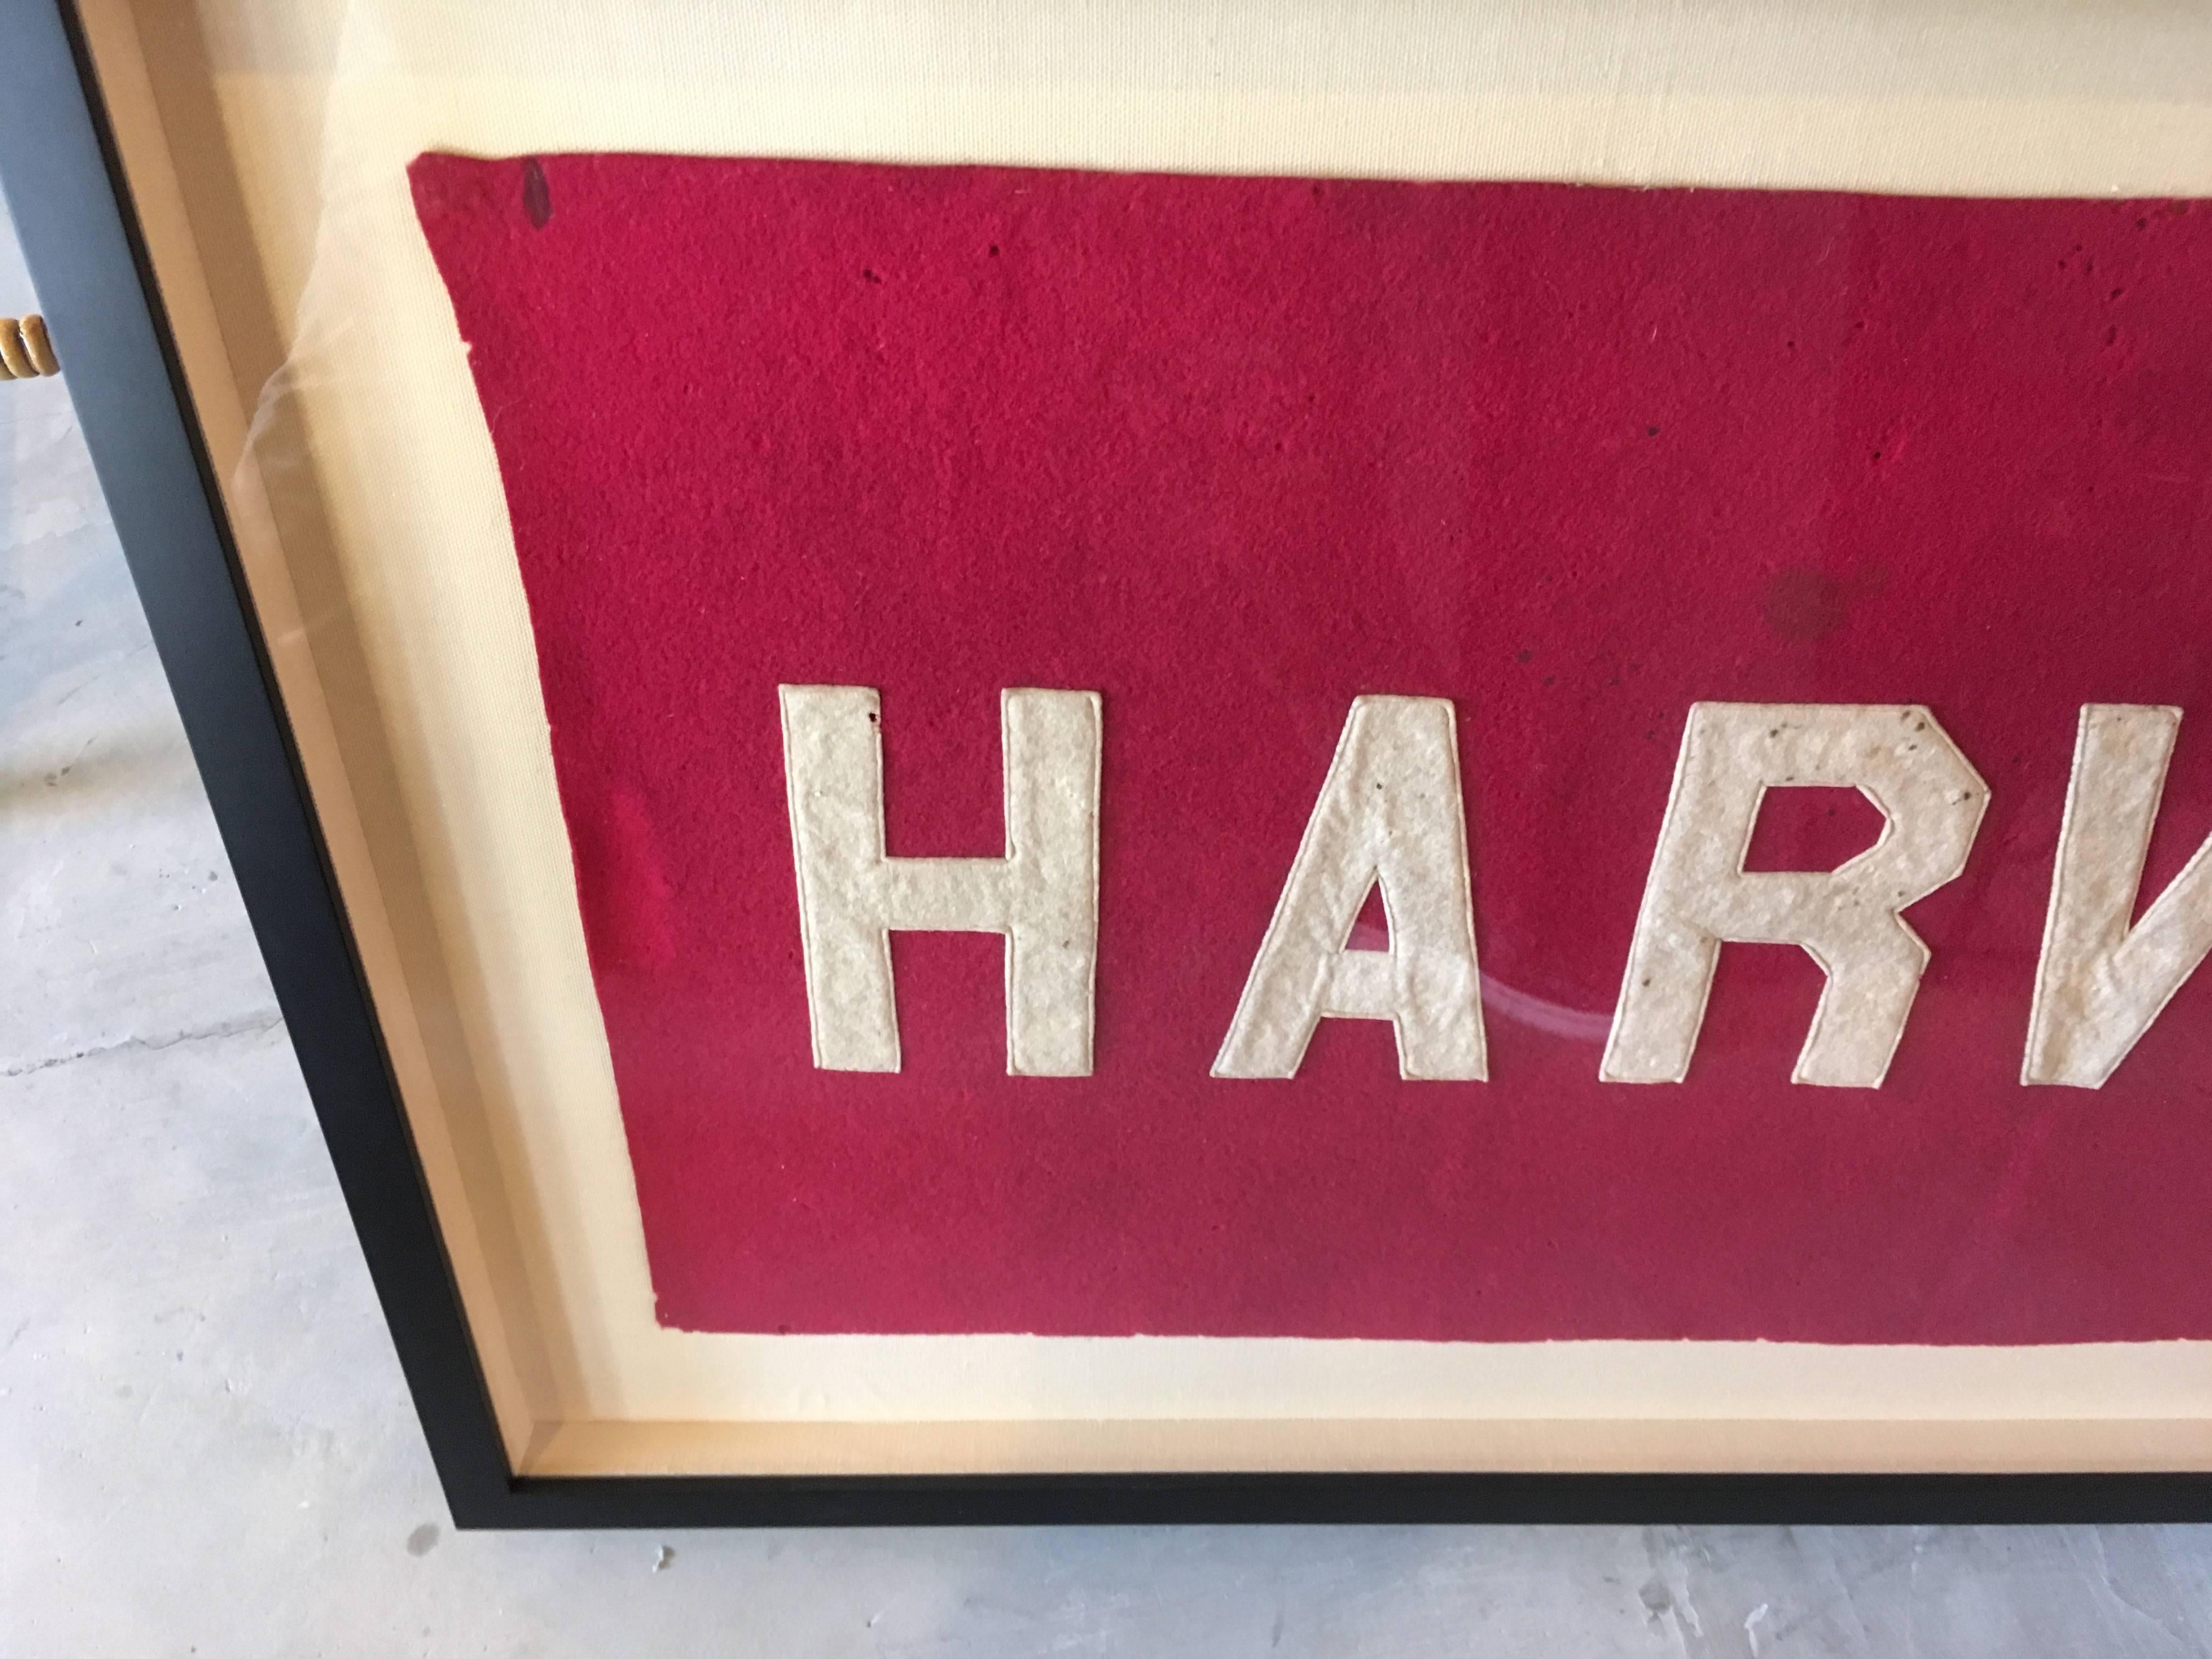 Unique Harvard University school banner from the 1930s. Great piece of Americana. Original red and white coloring with great patina. Hand stitched. Newly framed and mounted on linen backing.

Dimensions of banner are 15.5